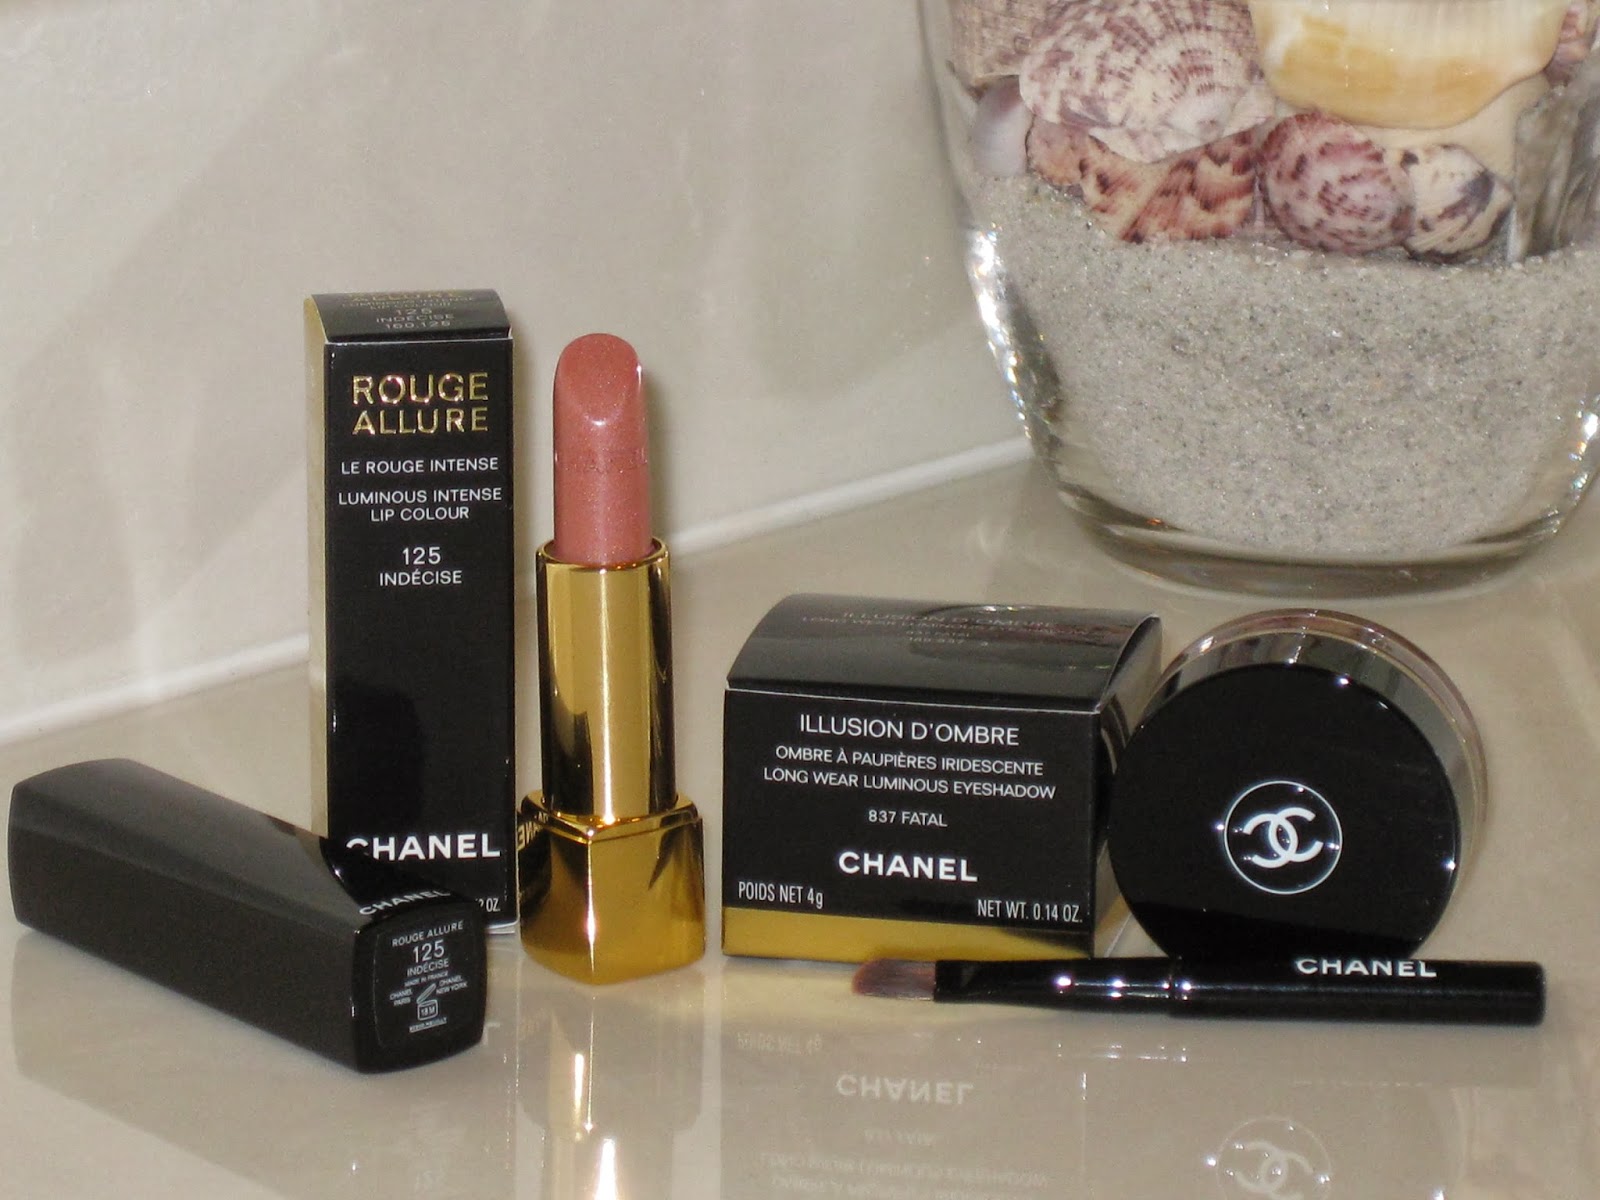 CHANEL Fall 2013 Lips & Eyes Indecise & Fatal